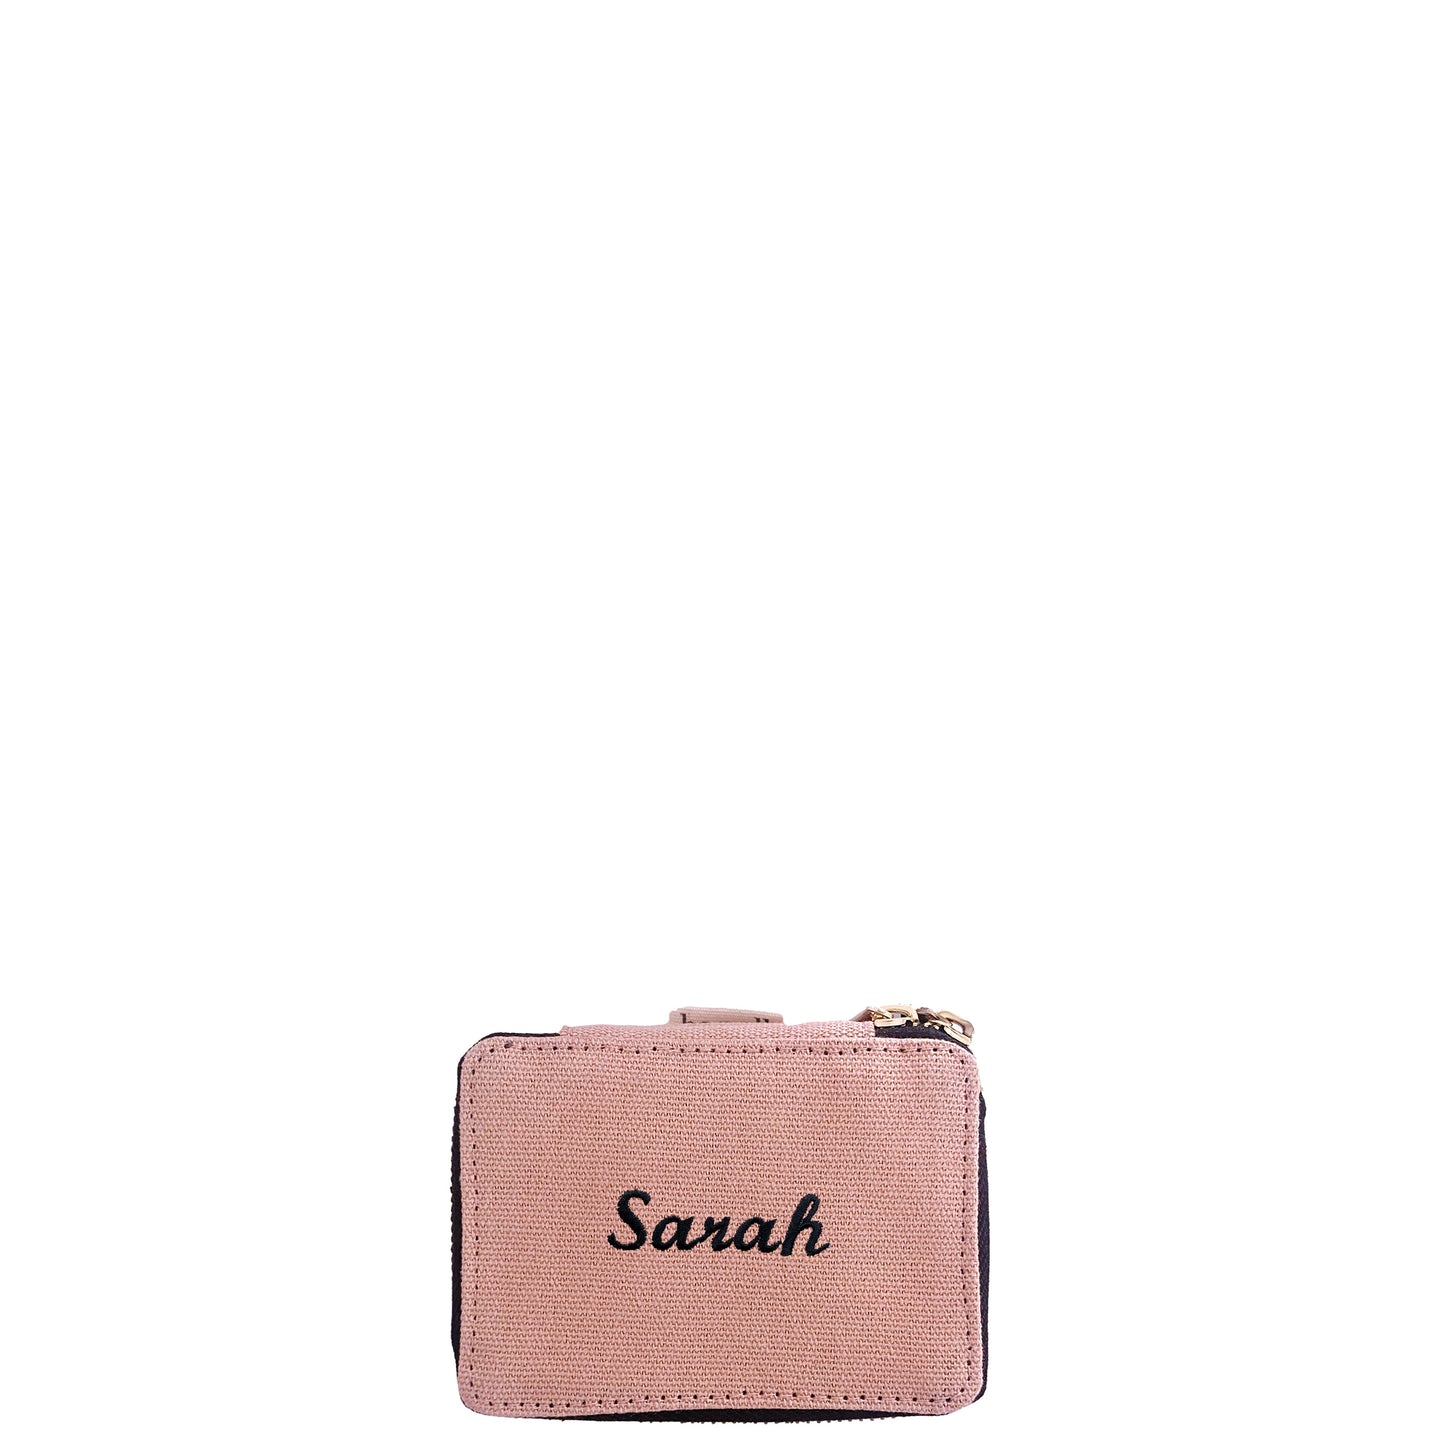 
                                      
                                        Pill Organizing Case with Weekly Insert, Pink/Blush | Bag-all Europe
                                      
                                    